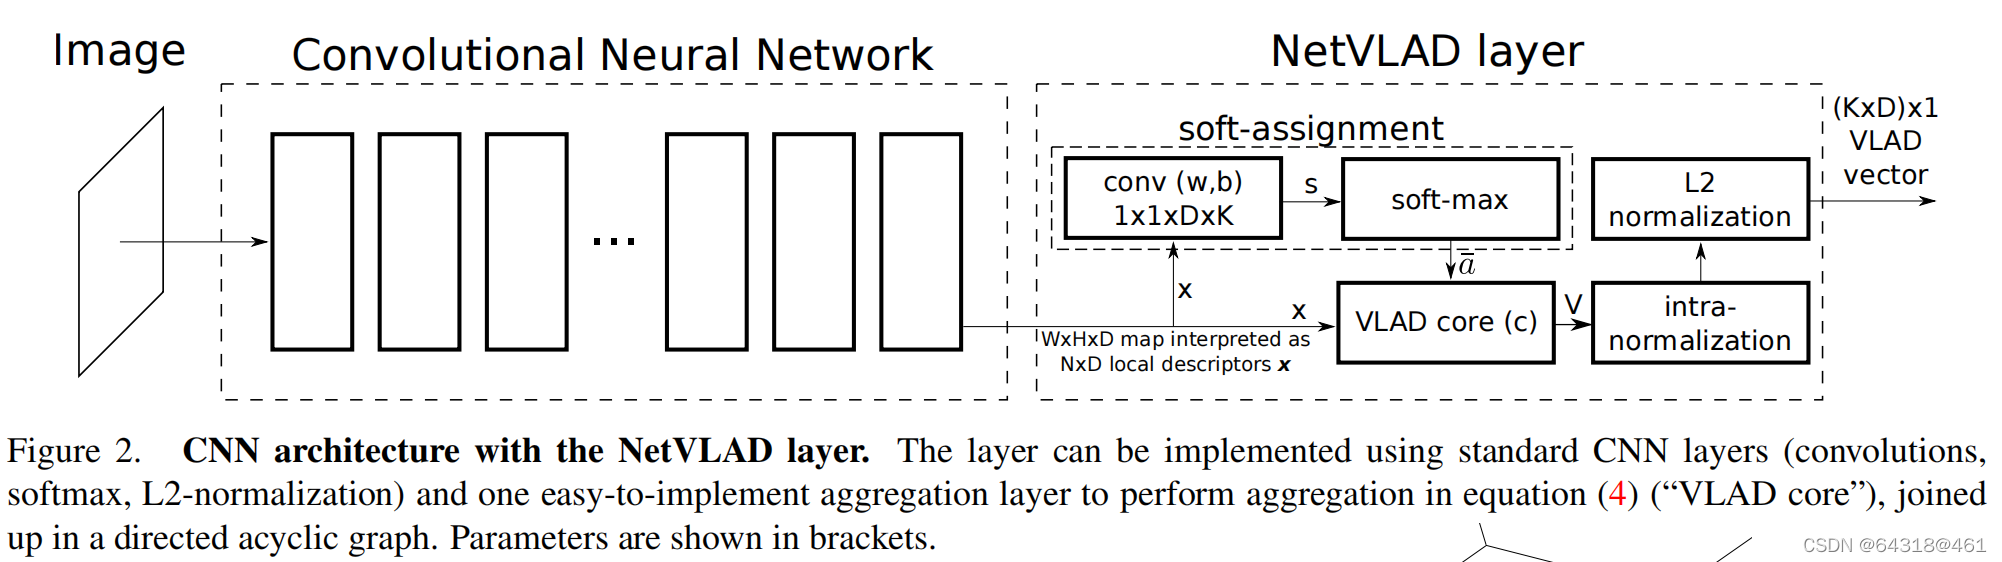 NetVLAD: CNN architecture for weakly supervised place recognition